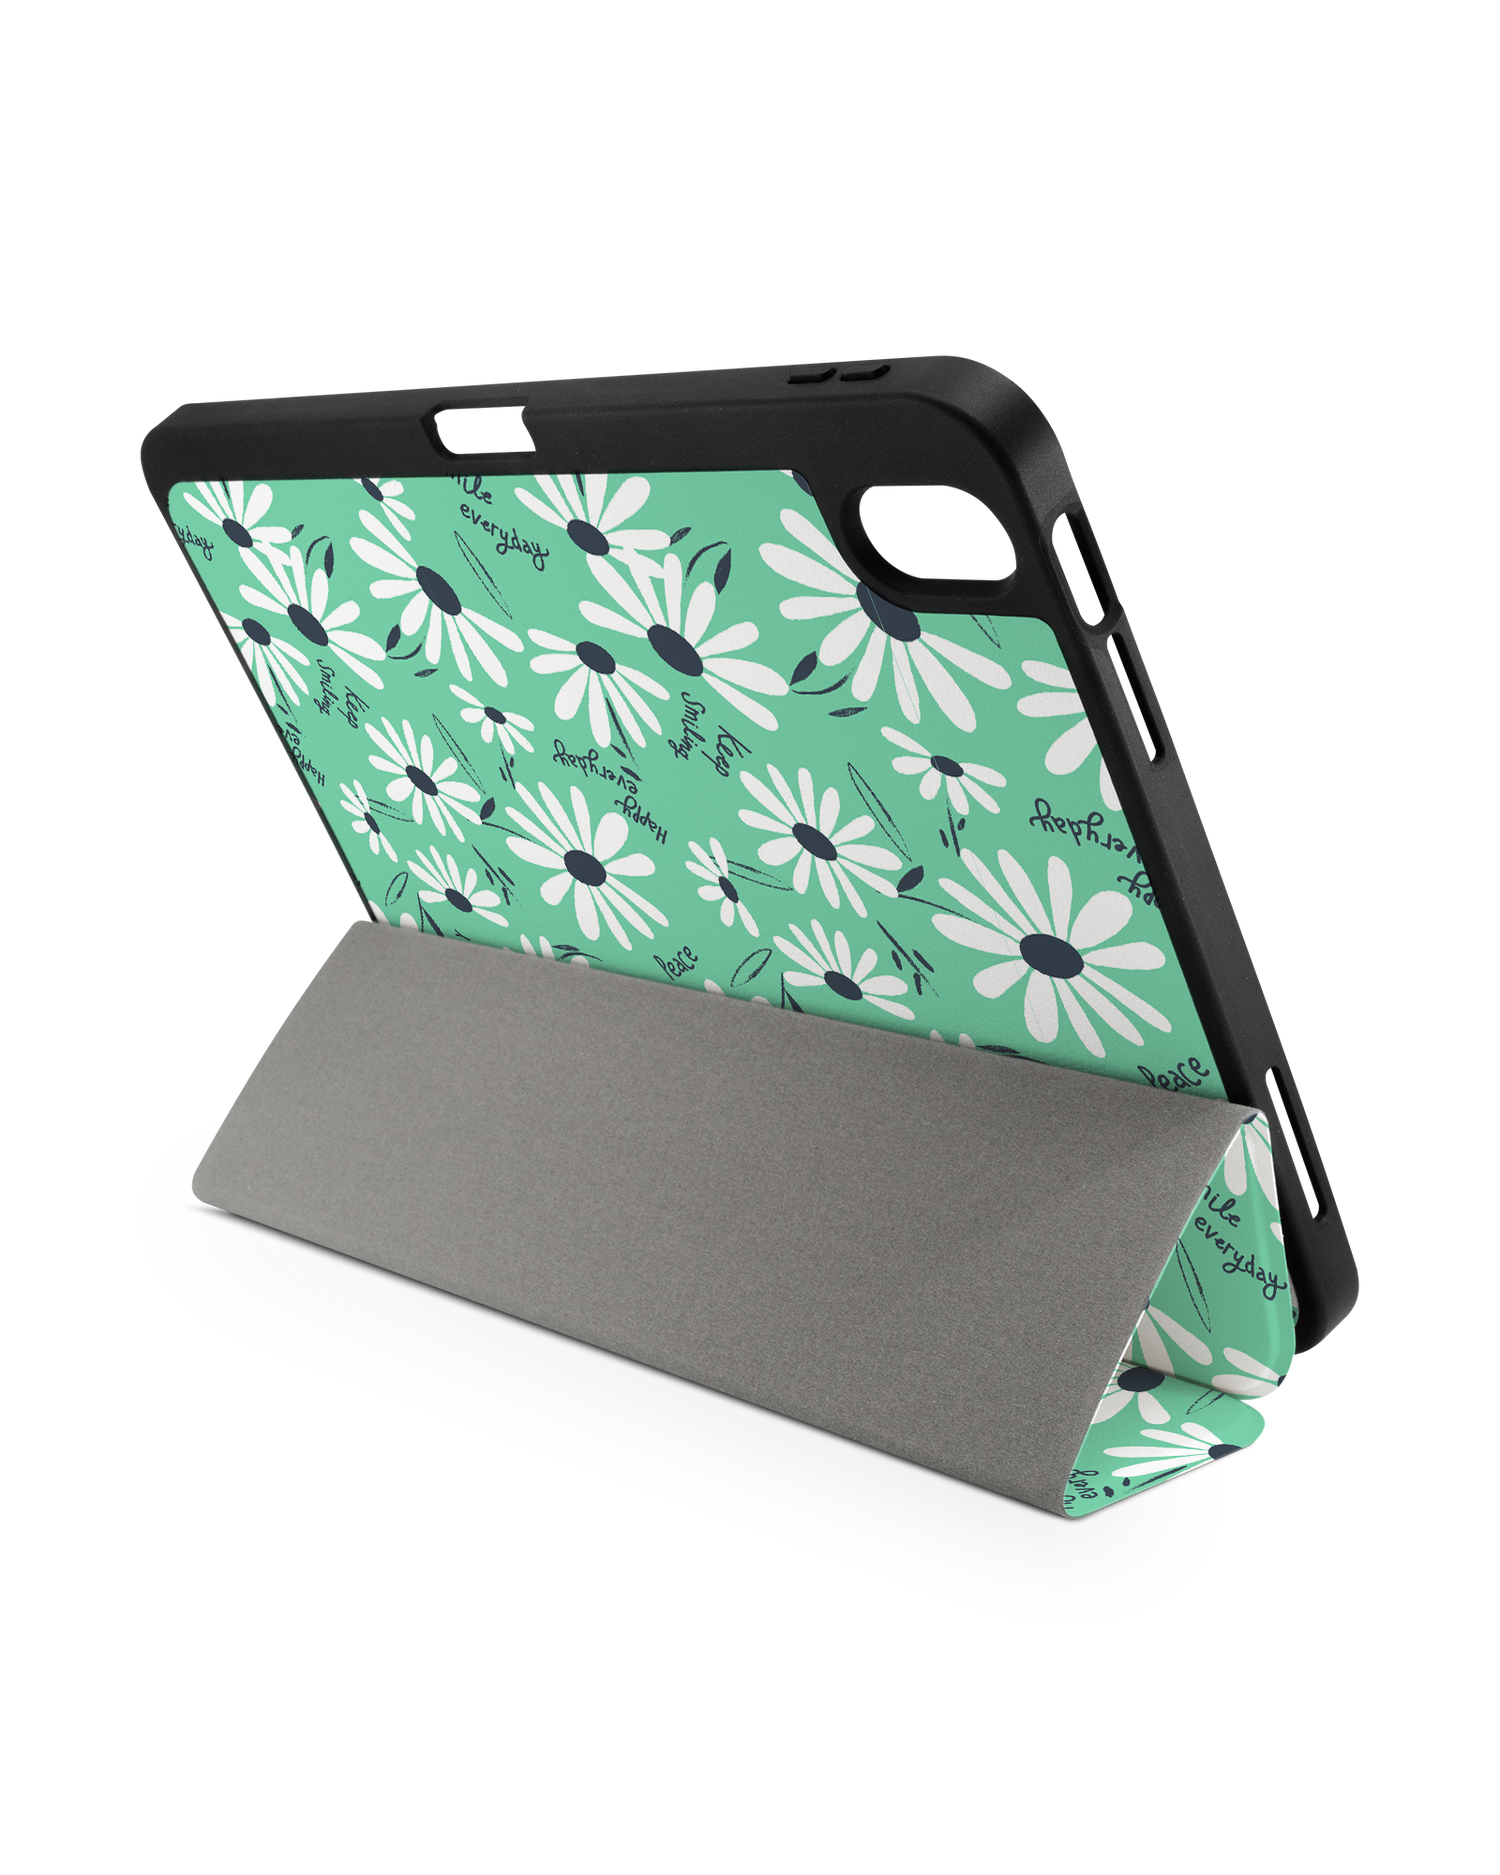 Positive Daisies iPad Case with Pencil Holder for Apple iPad (10th Generation): Set up in landscape format (back view)